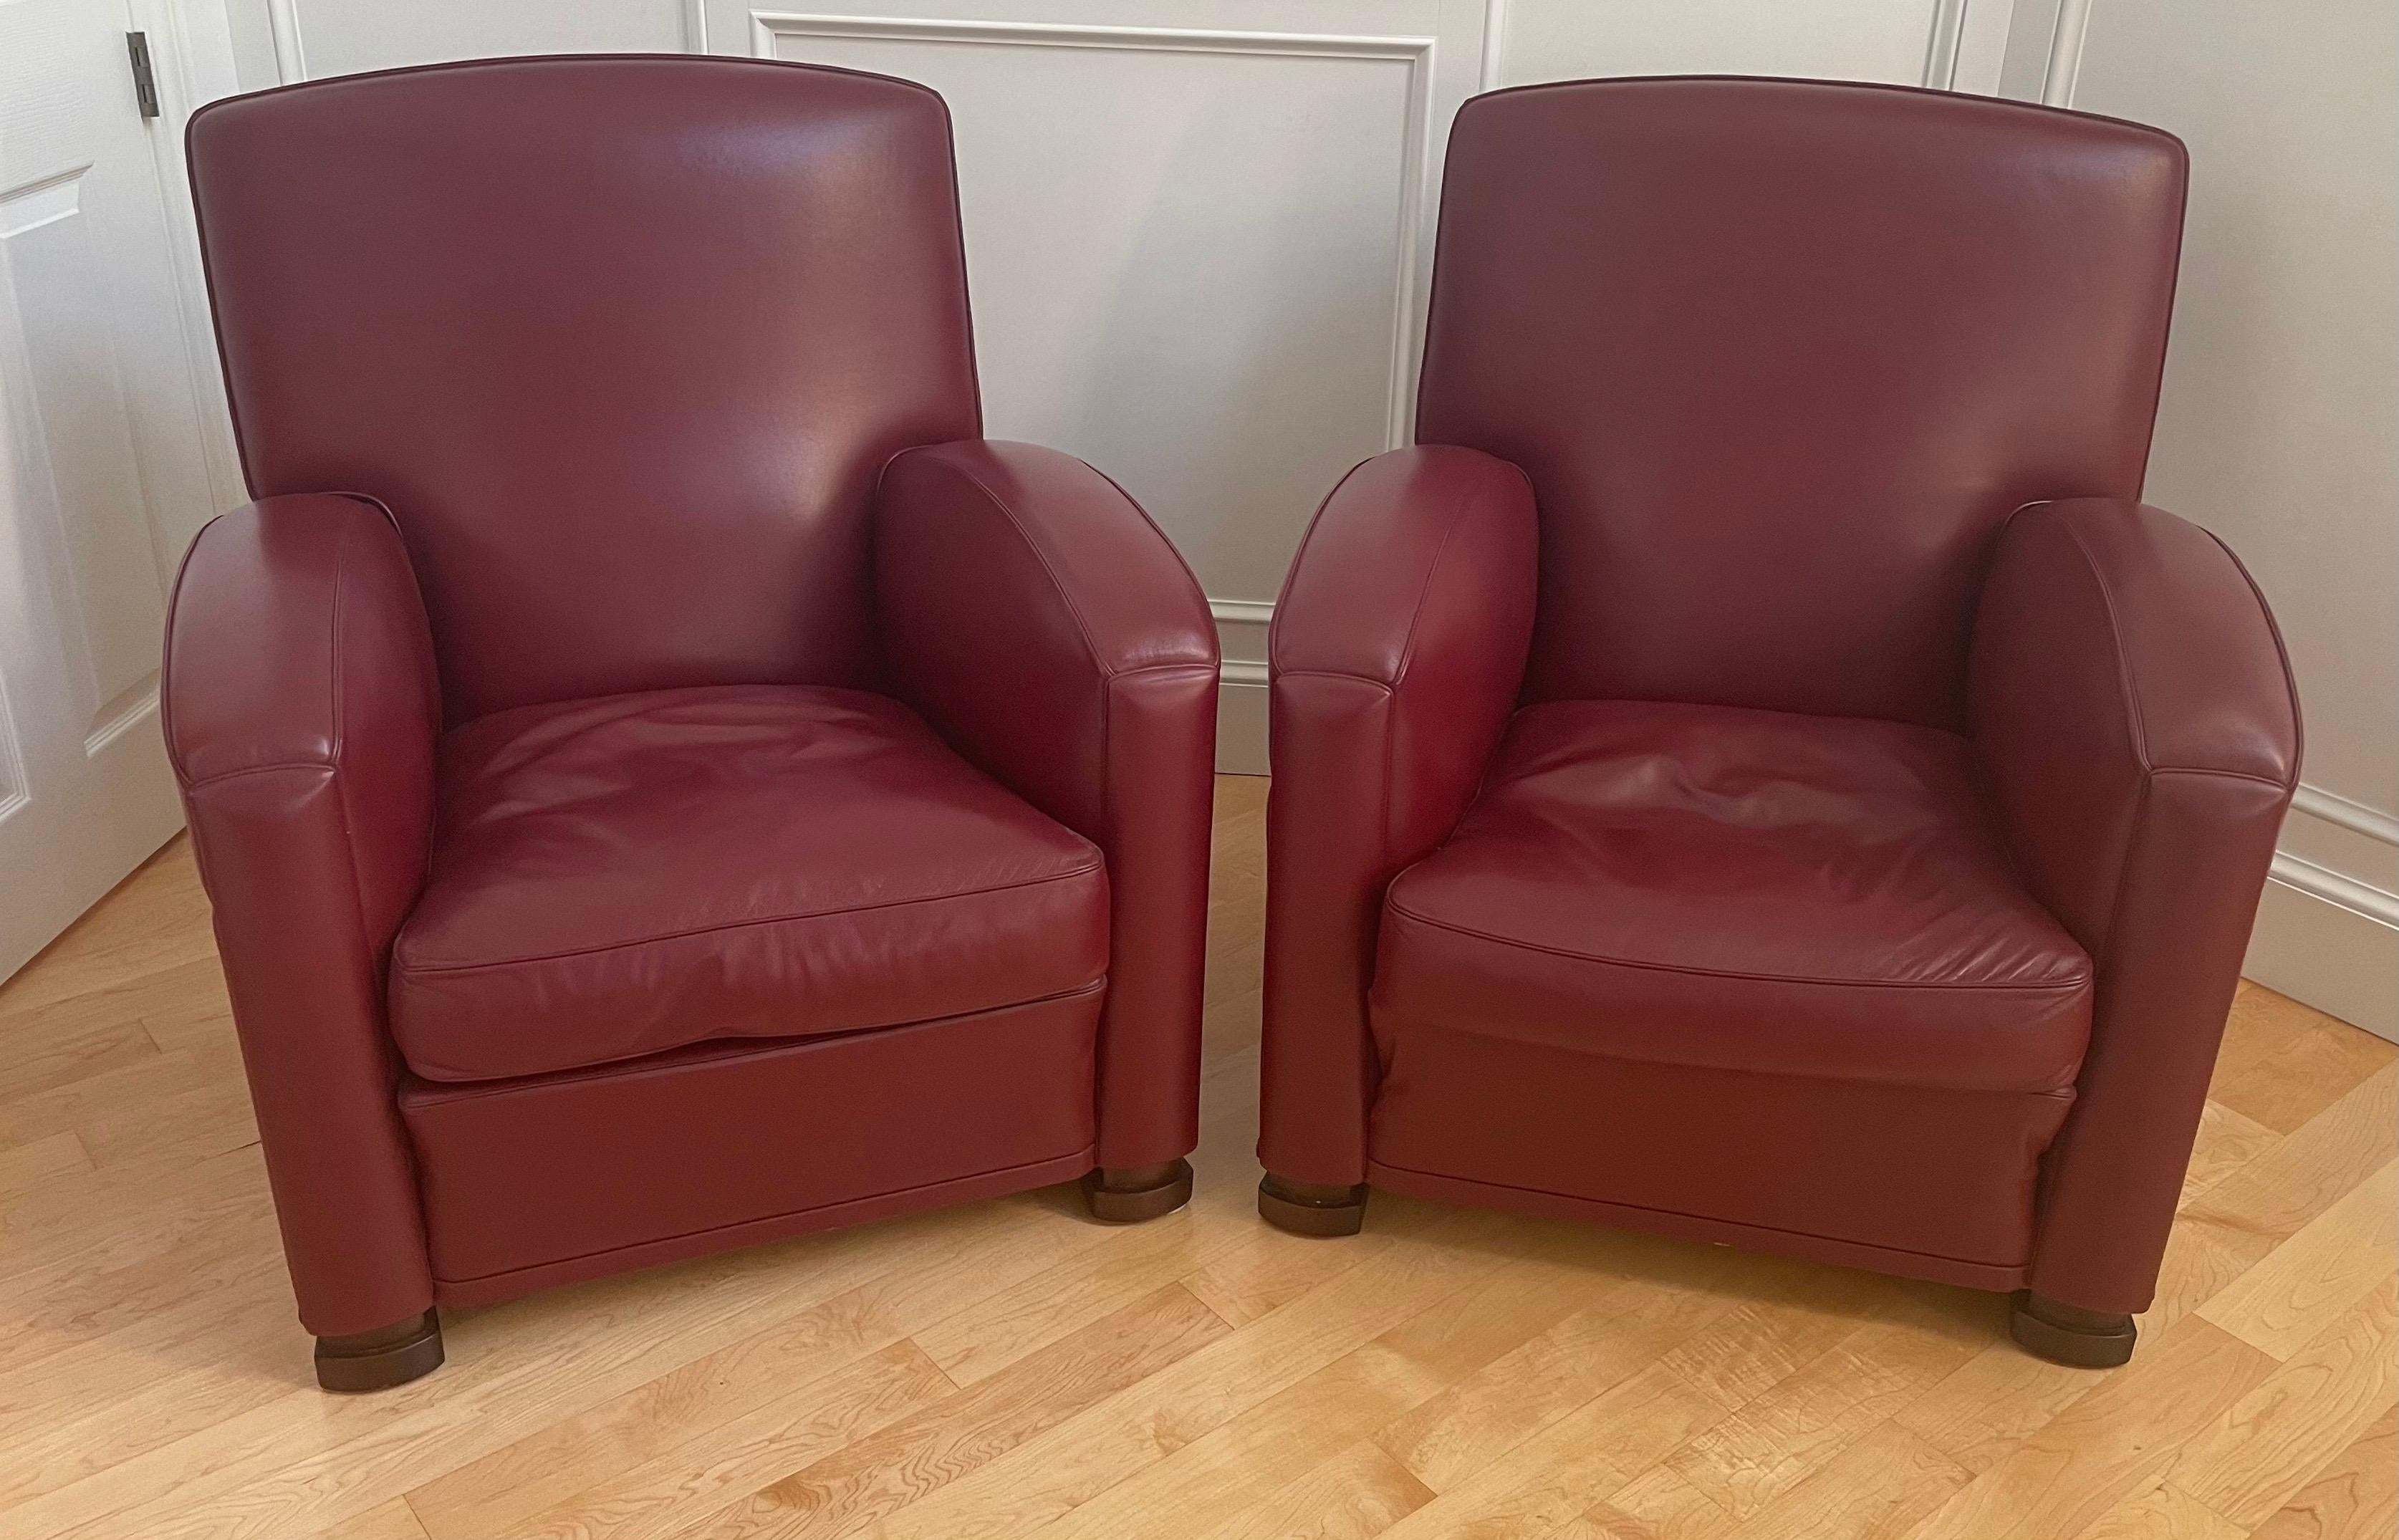 Elegant pair of striking red bordeaux leather arm chairs by Poltrona Frau, circa 2000s. The chairs are in great original condition, incredibly well made and have an Art Deco look. The chairs have a beech wood frame and feet and the padding uses both